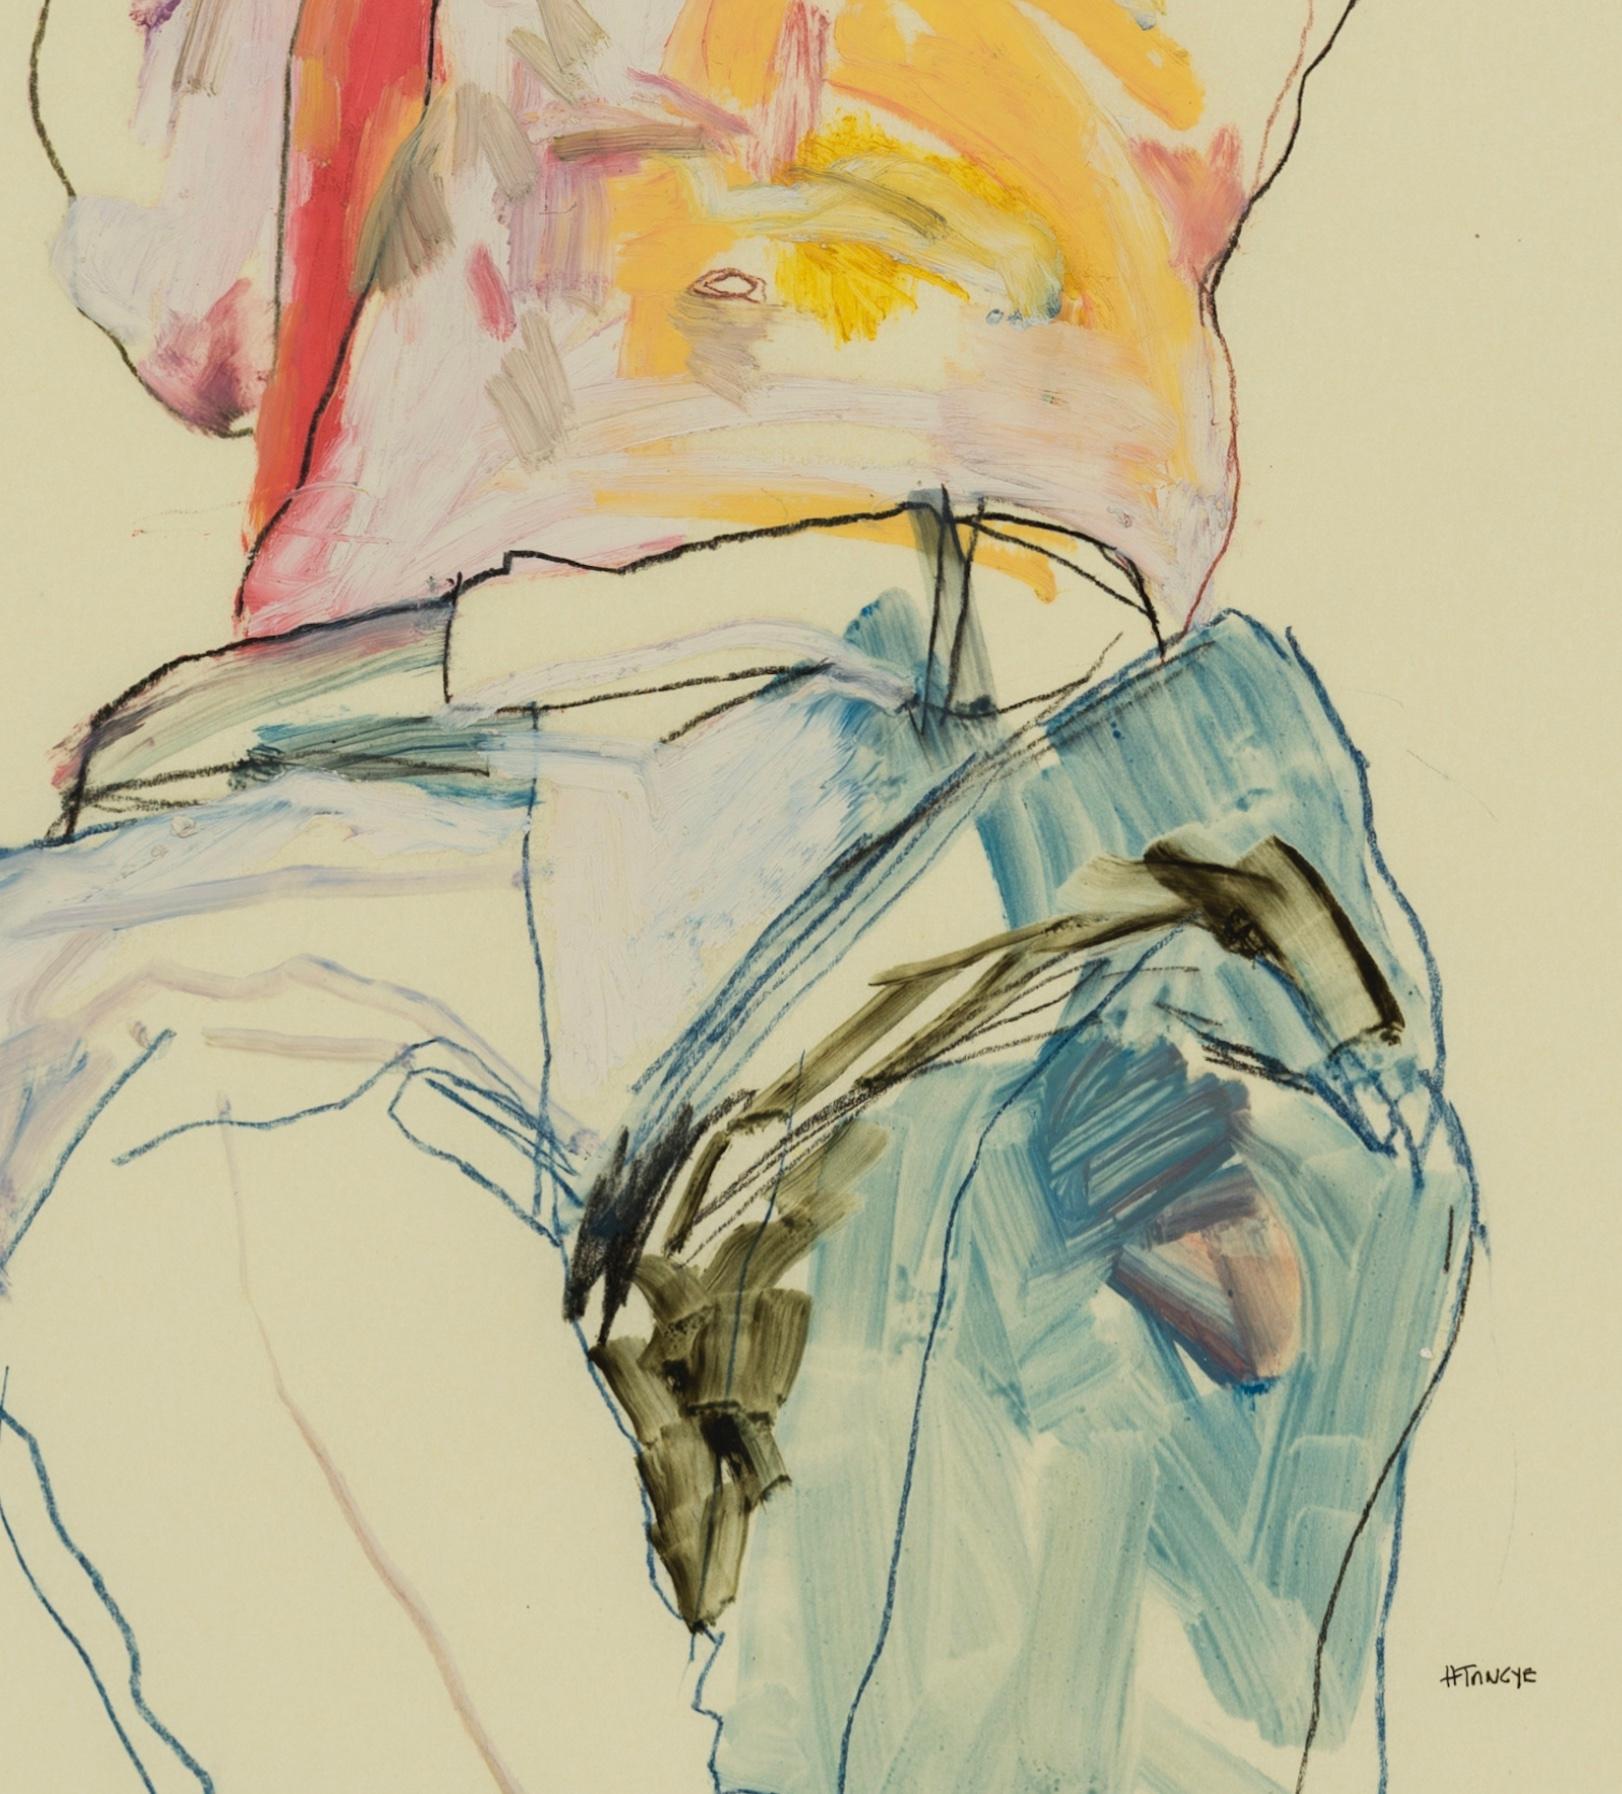 Francesco (Blue Trousers), Mixed media on Pergamenata parchment - Beige Figurative Painting by Howard Tangye